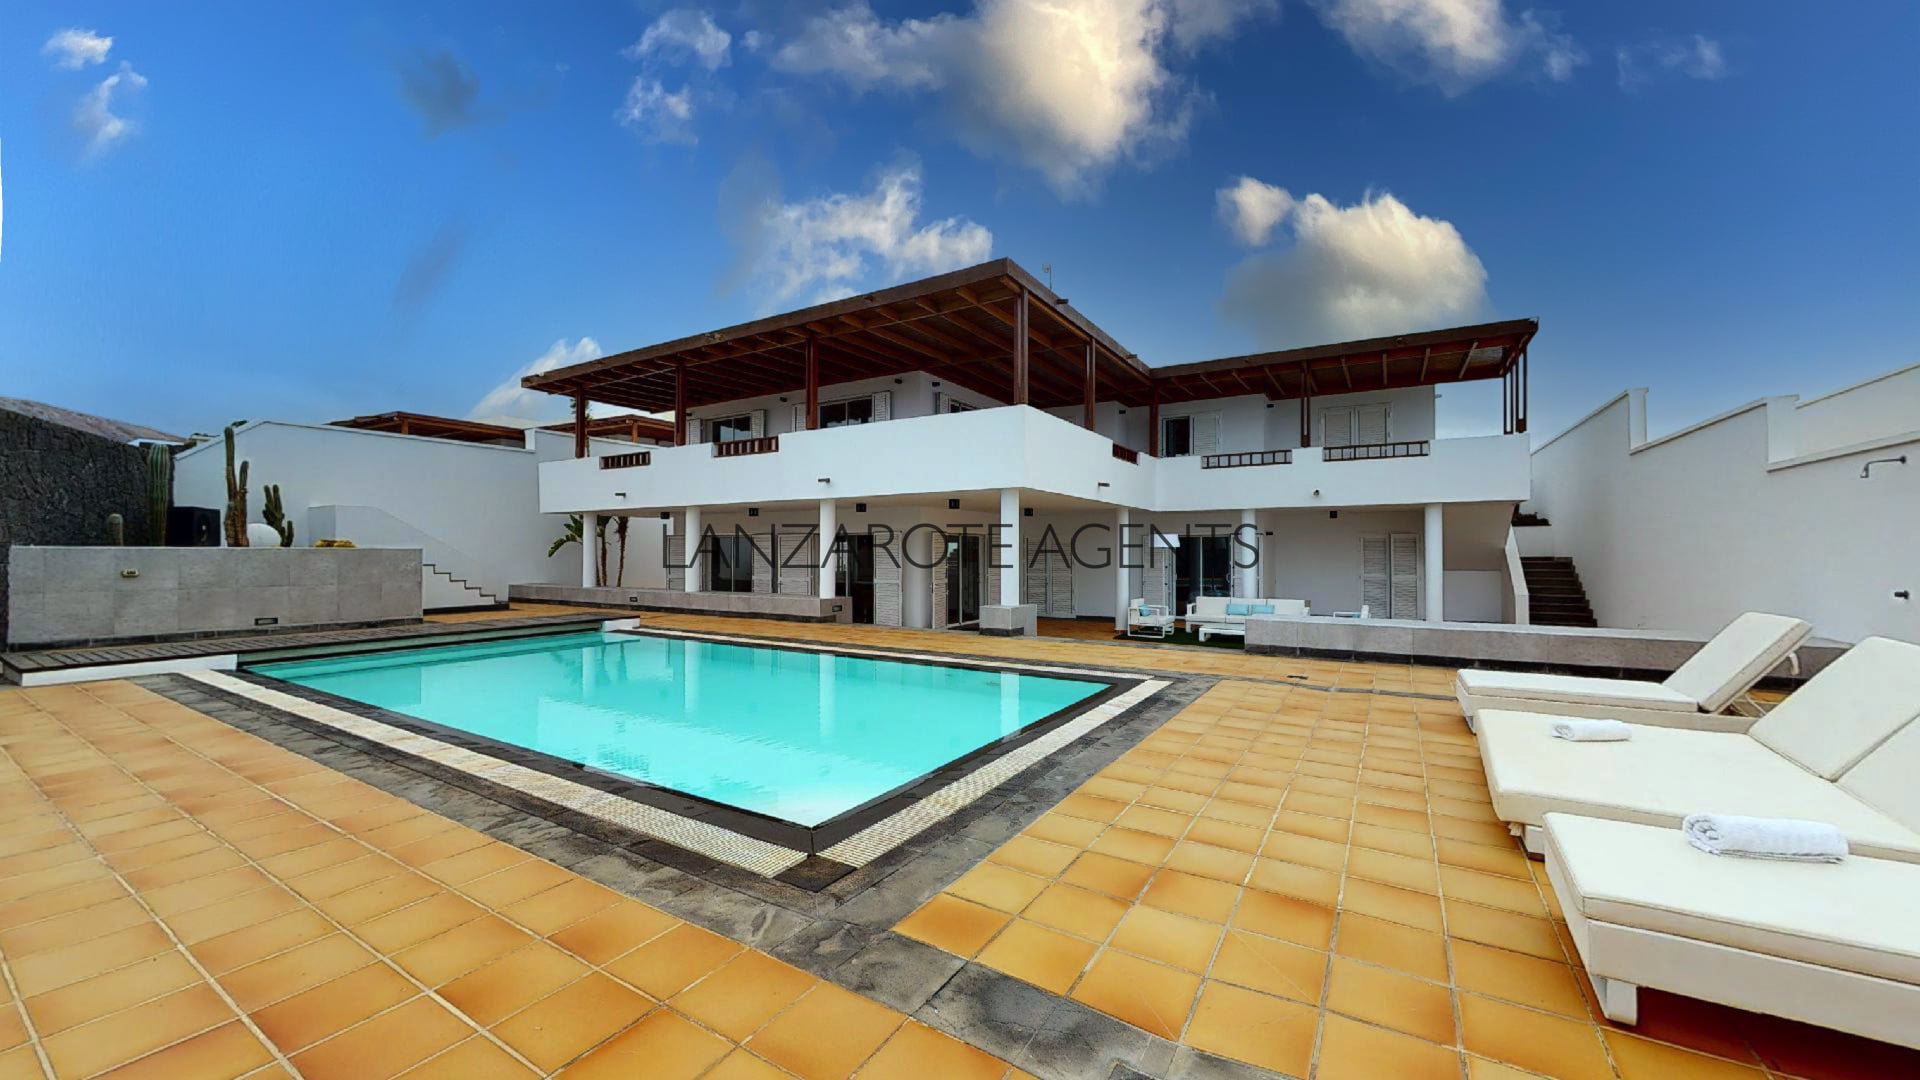 Luxury Detached 4 Bedroom Villa for sale in Lanzarote in Puerto Calero with Sea Views and Top Quality Fittings and Furnishings, All Recently Refurbished